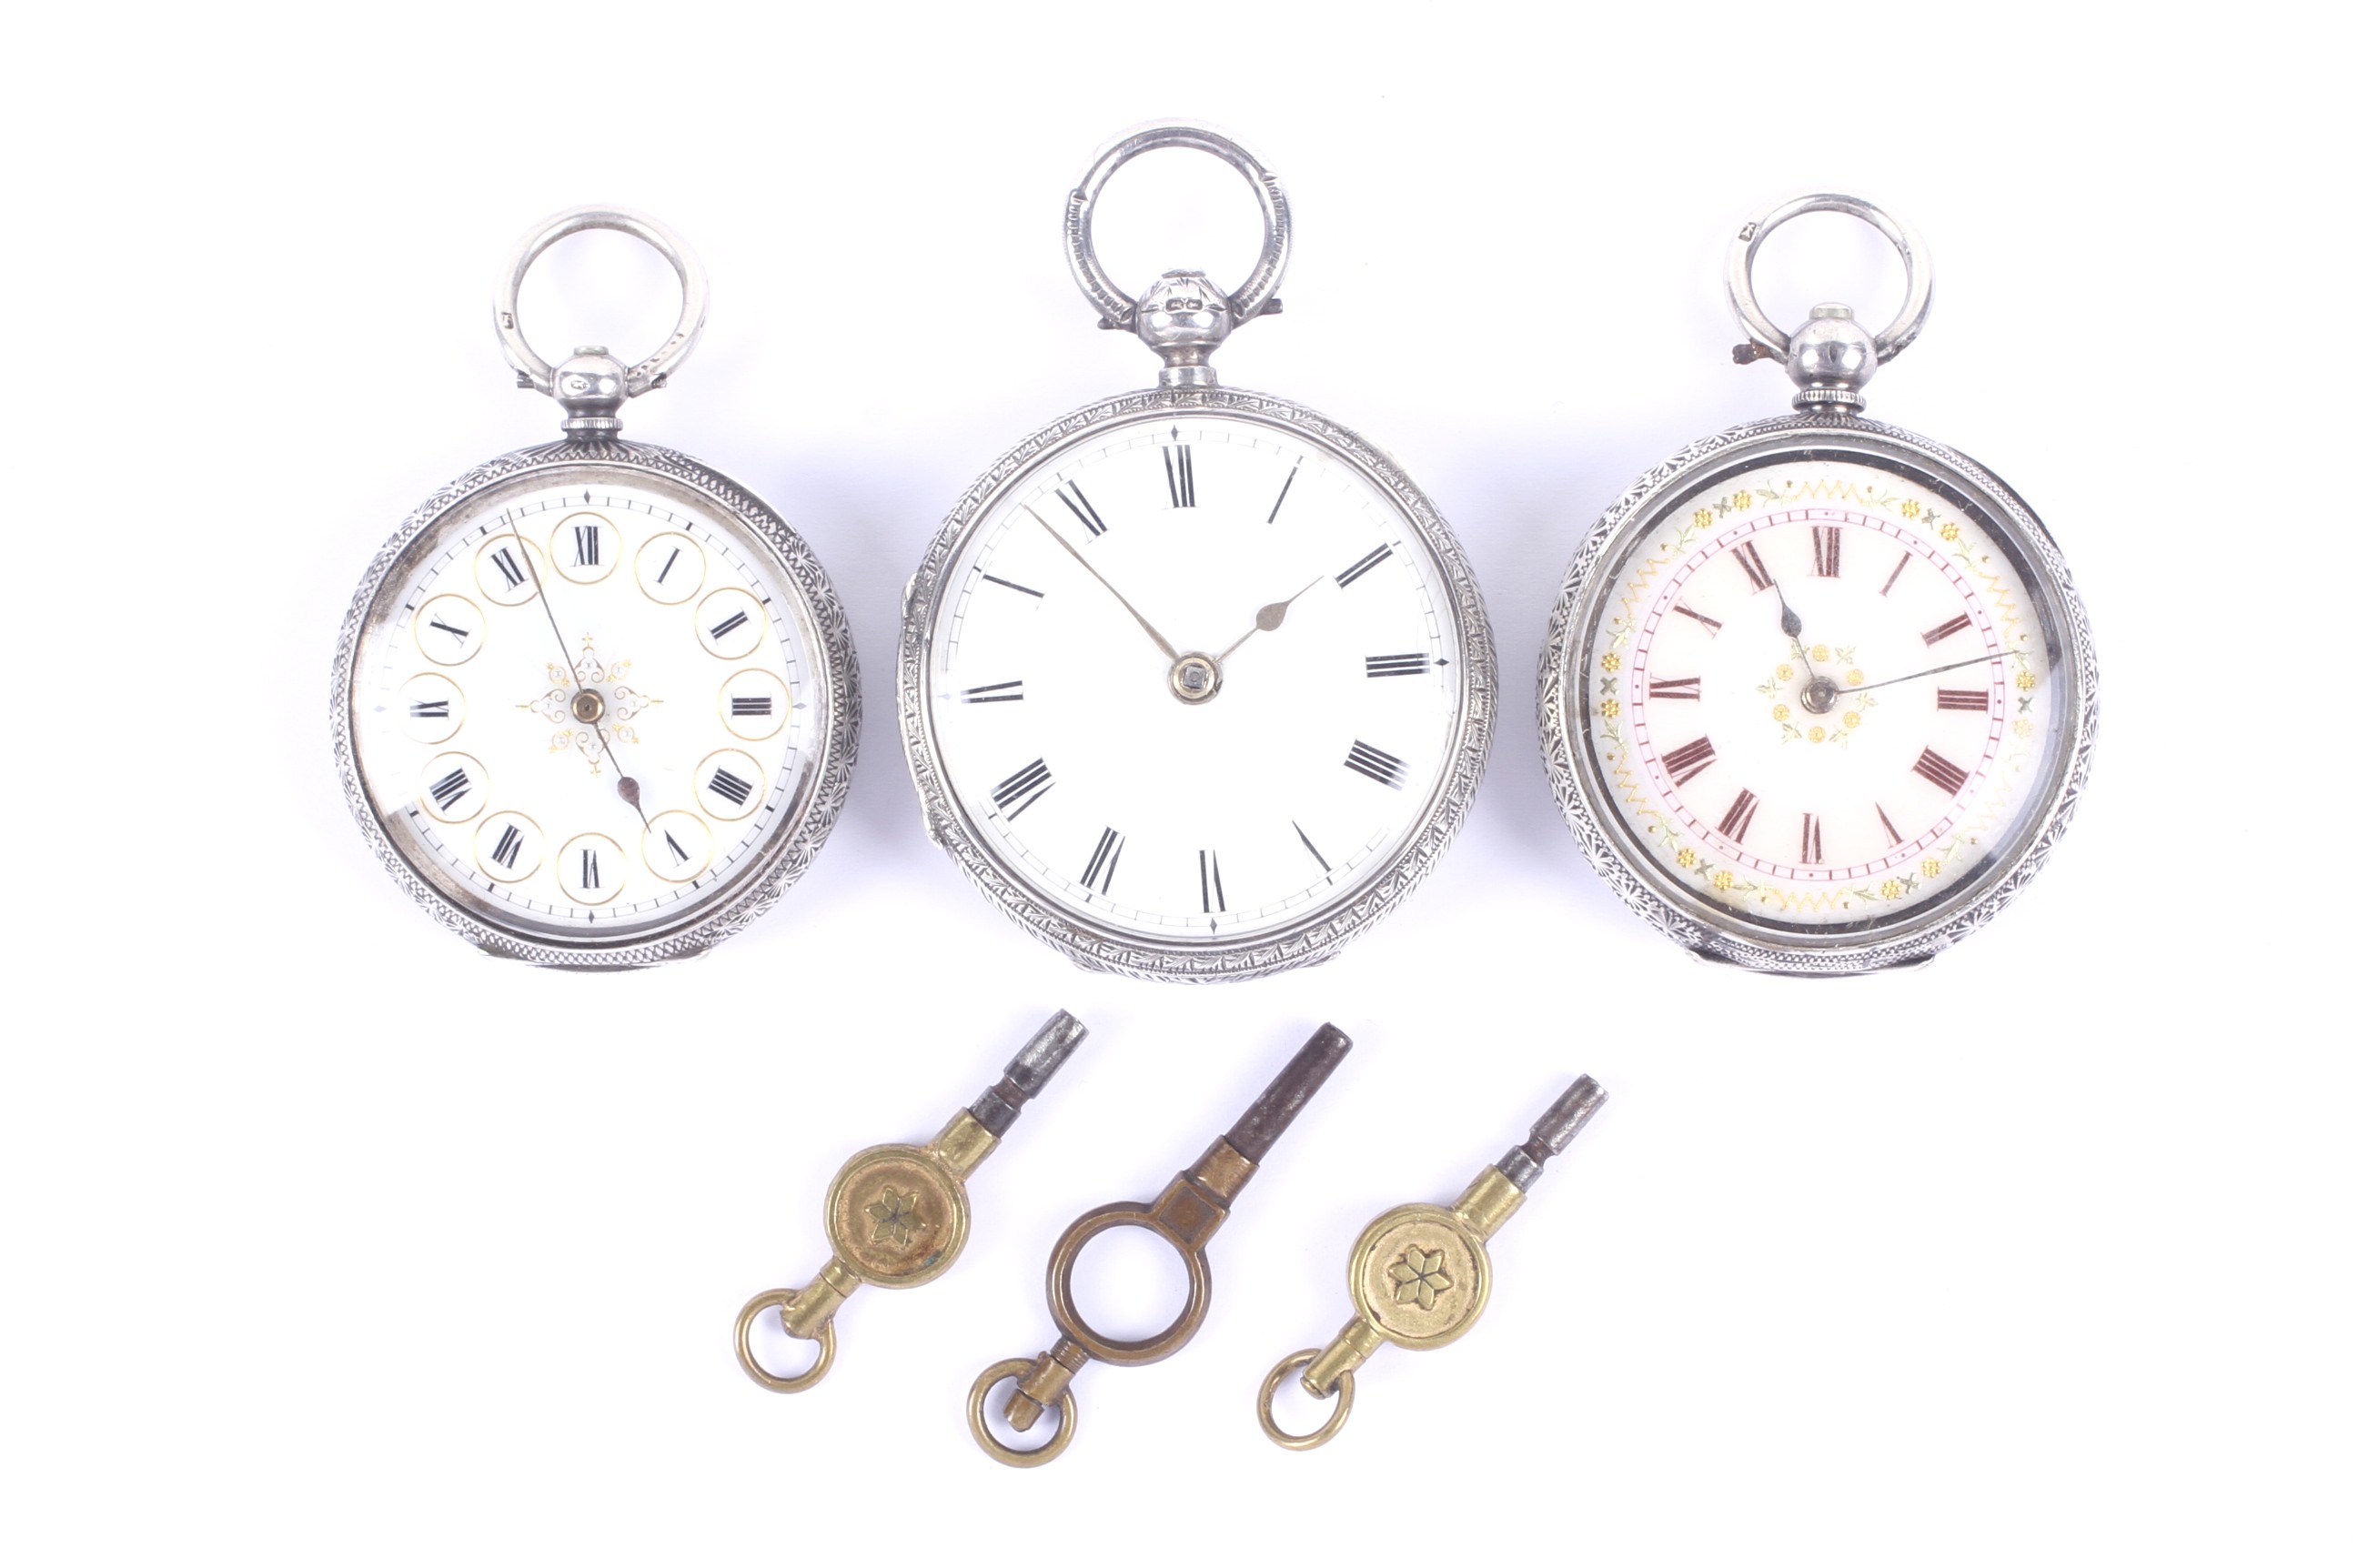 Two late 19th century Swiss .935 standard open face fob watches.